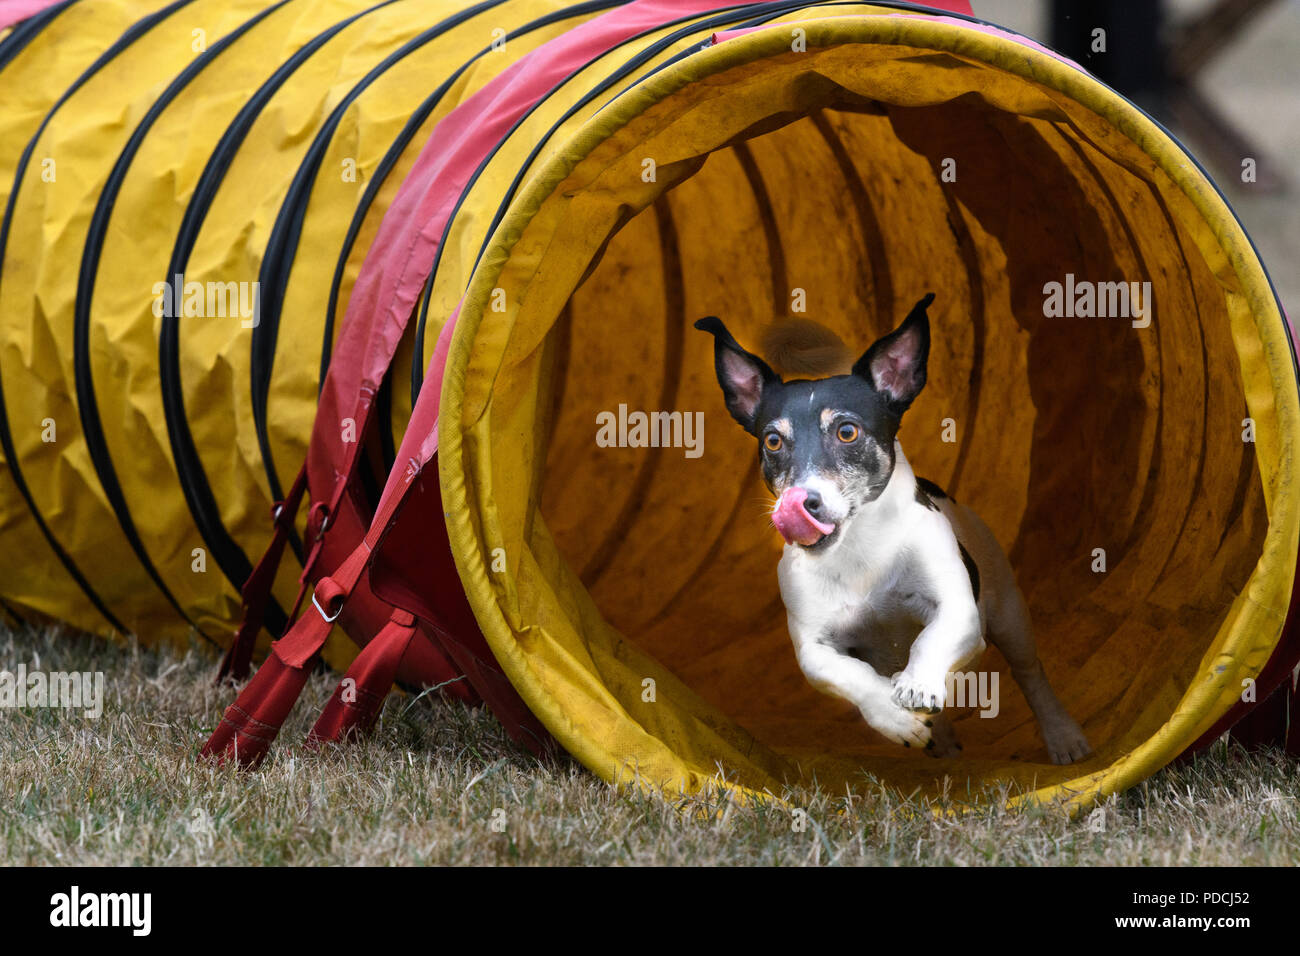 Rockingham Castle, Corby, England. 9th August 2018. With a look of keen concentration, a competing dog exits a tunnel successfully at the Kennel Club's international dog agility competition in the Great Park of Rockingham castle, Corby, England, on 9th August 2018. Credit: Michael Foley/Alamy Live News Stock Photo